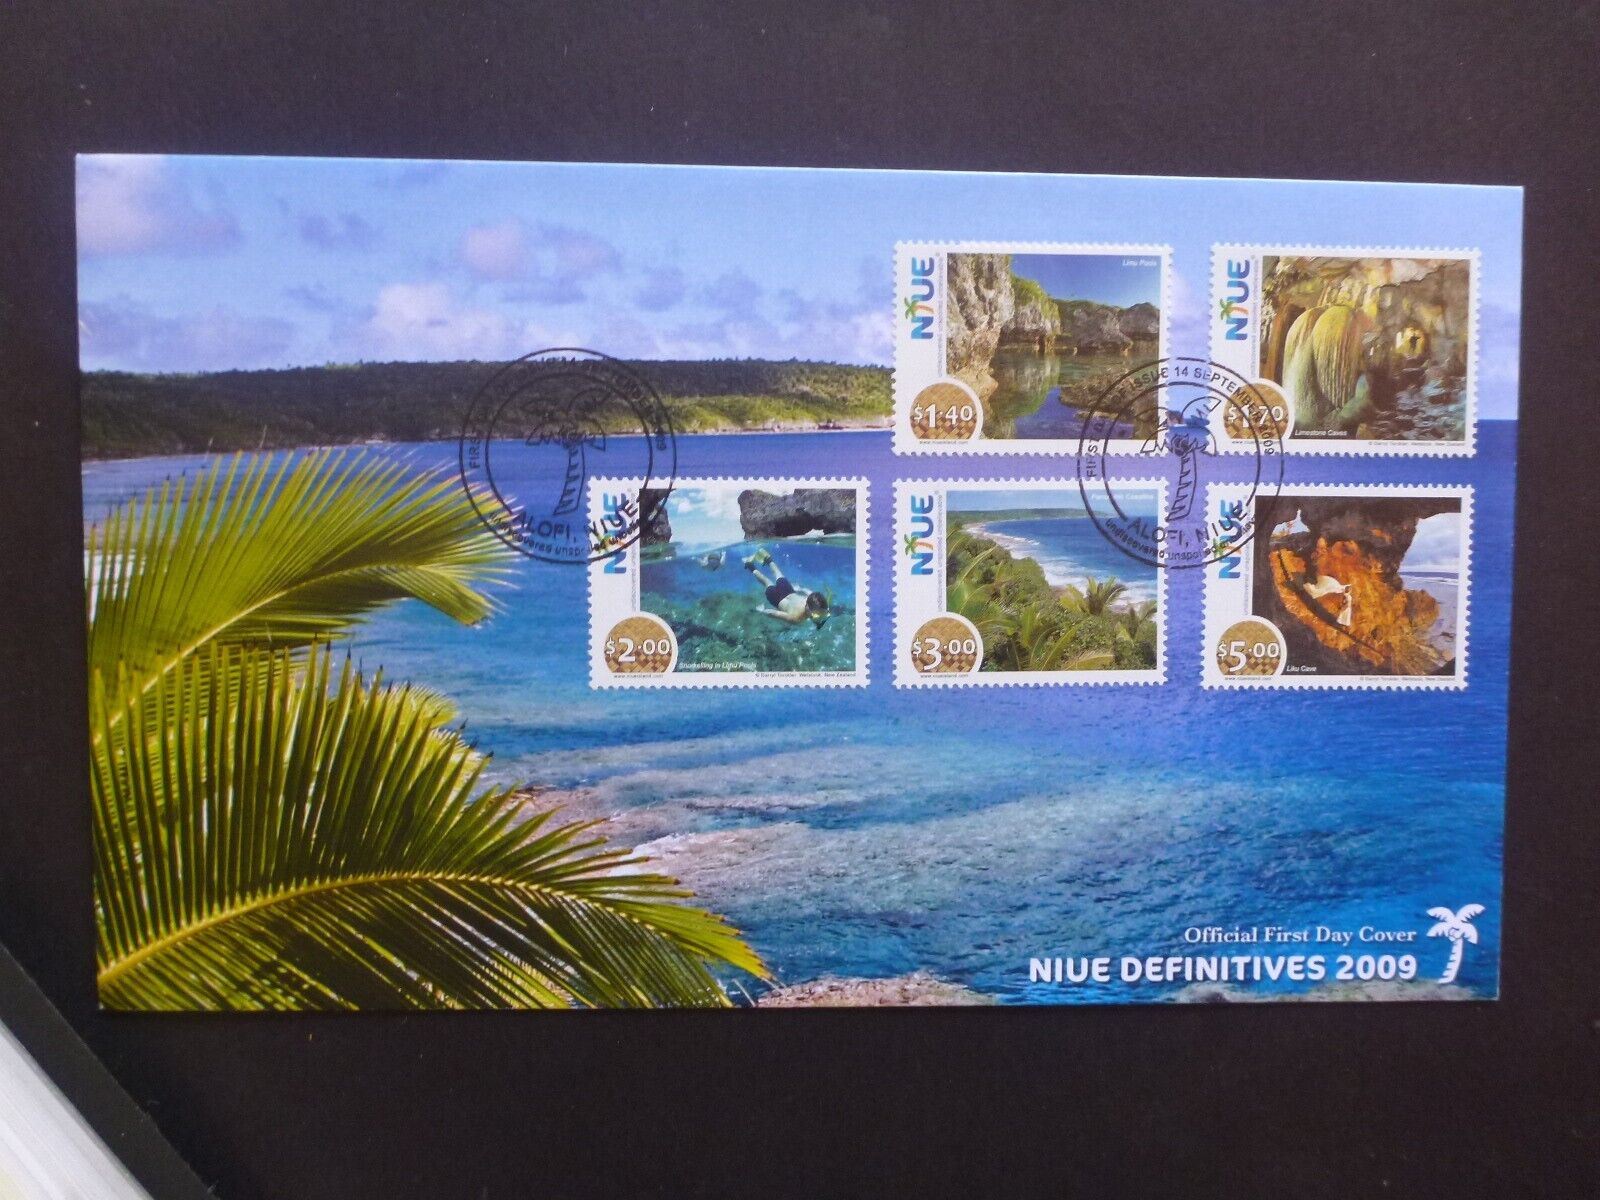 2009 NIUE SCENES DEFINITIVES SET 11 STAMPS FIRST DAY COVERS PAIR